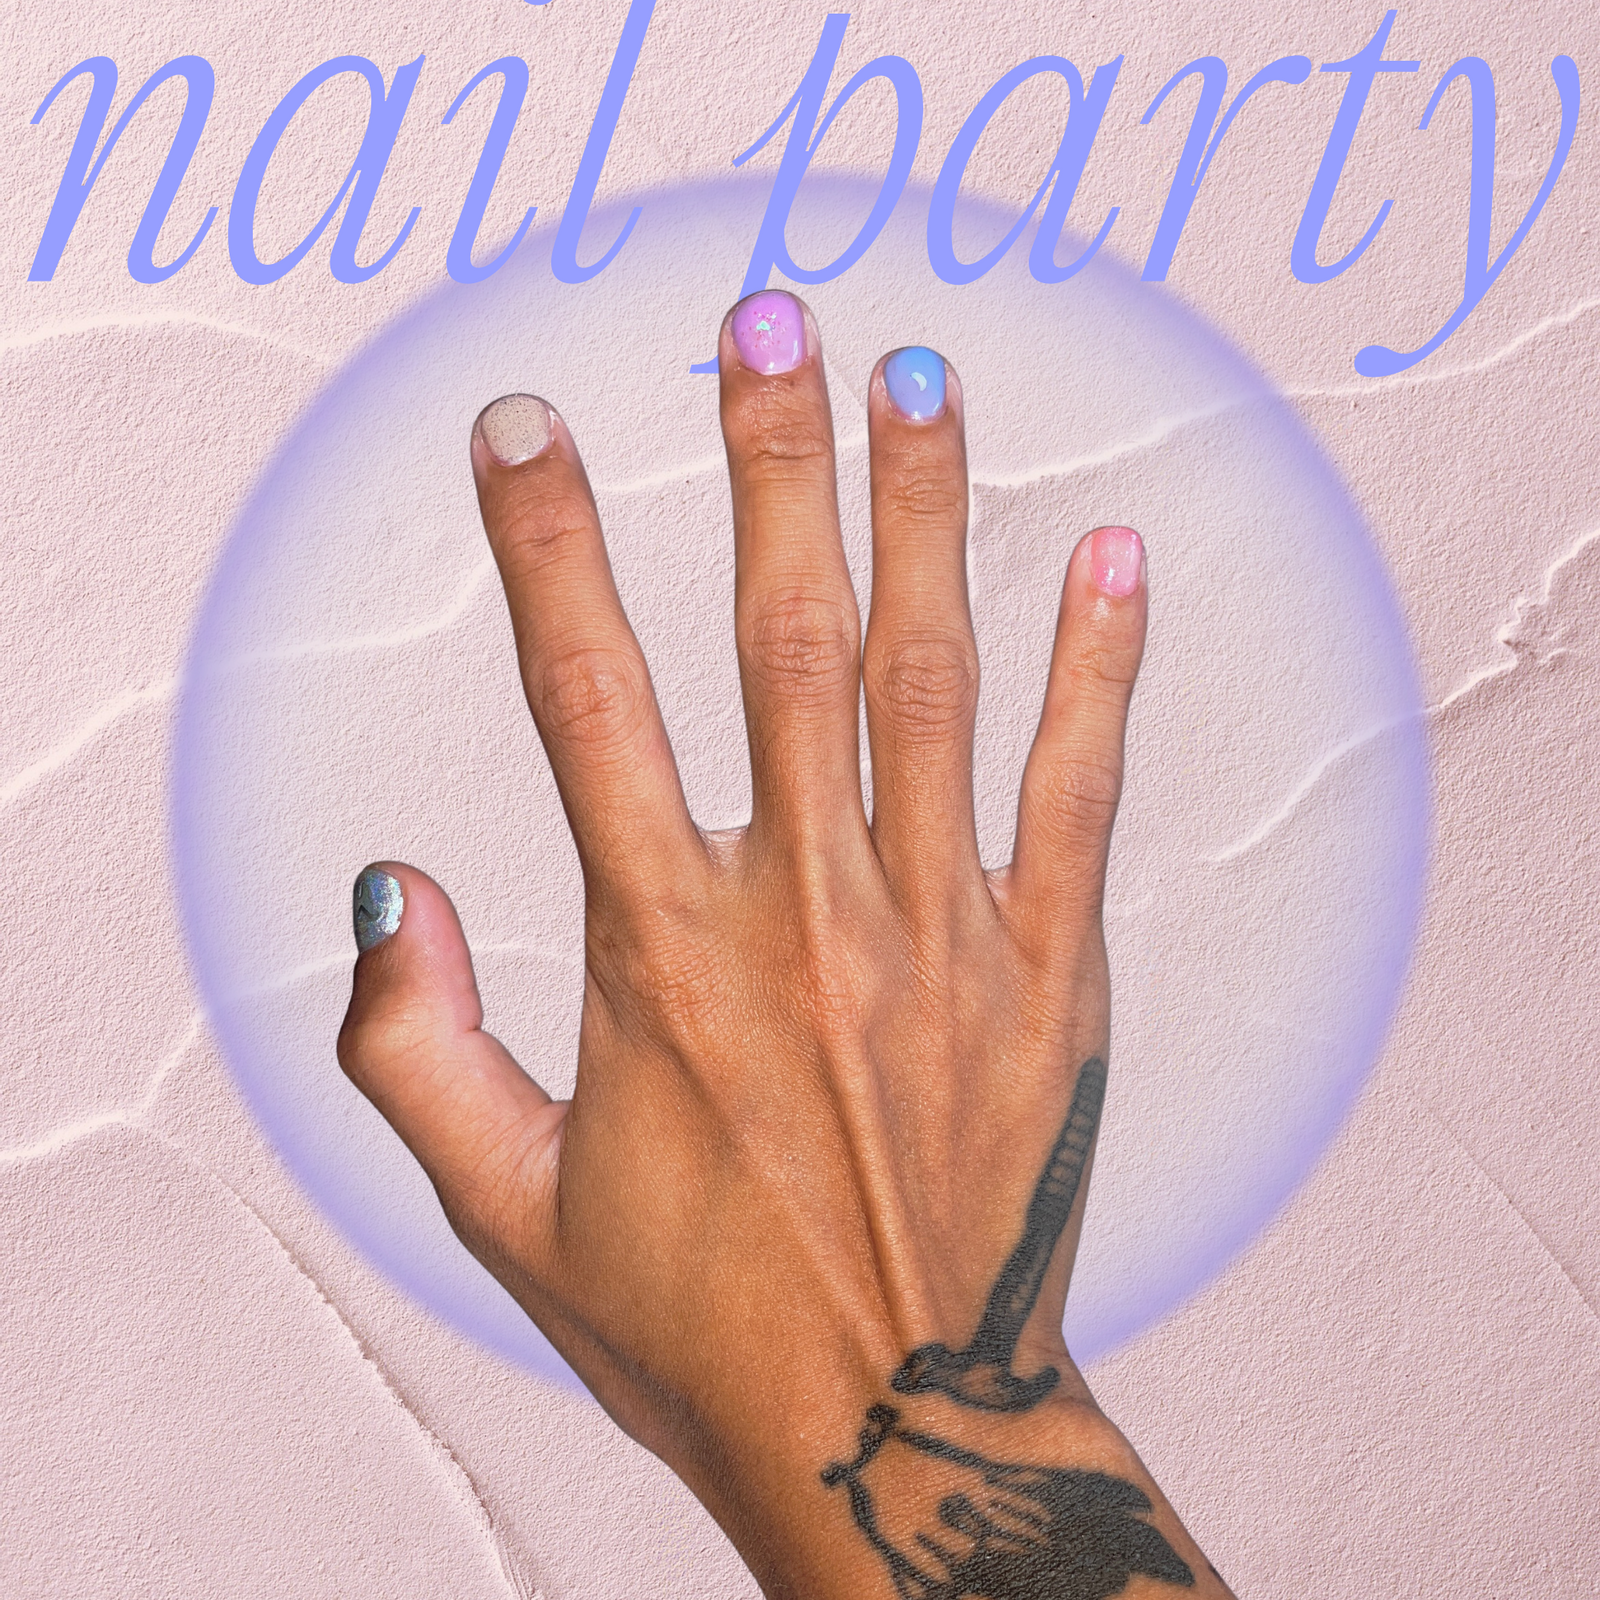 It’s a Nail Party, and everyone’s invited!